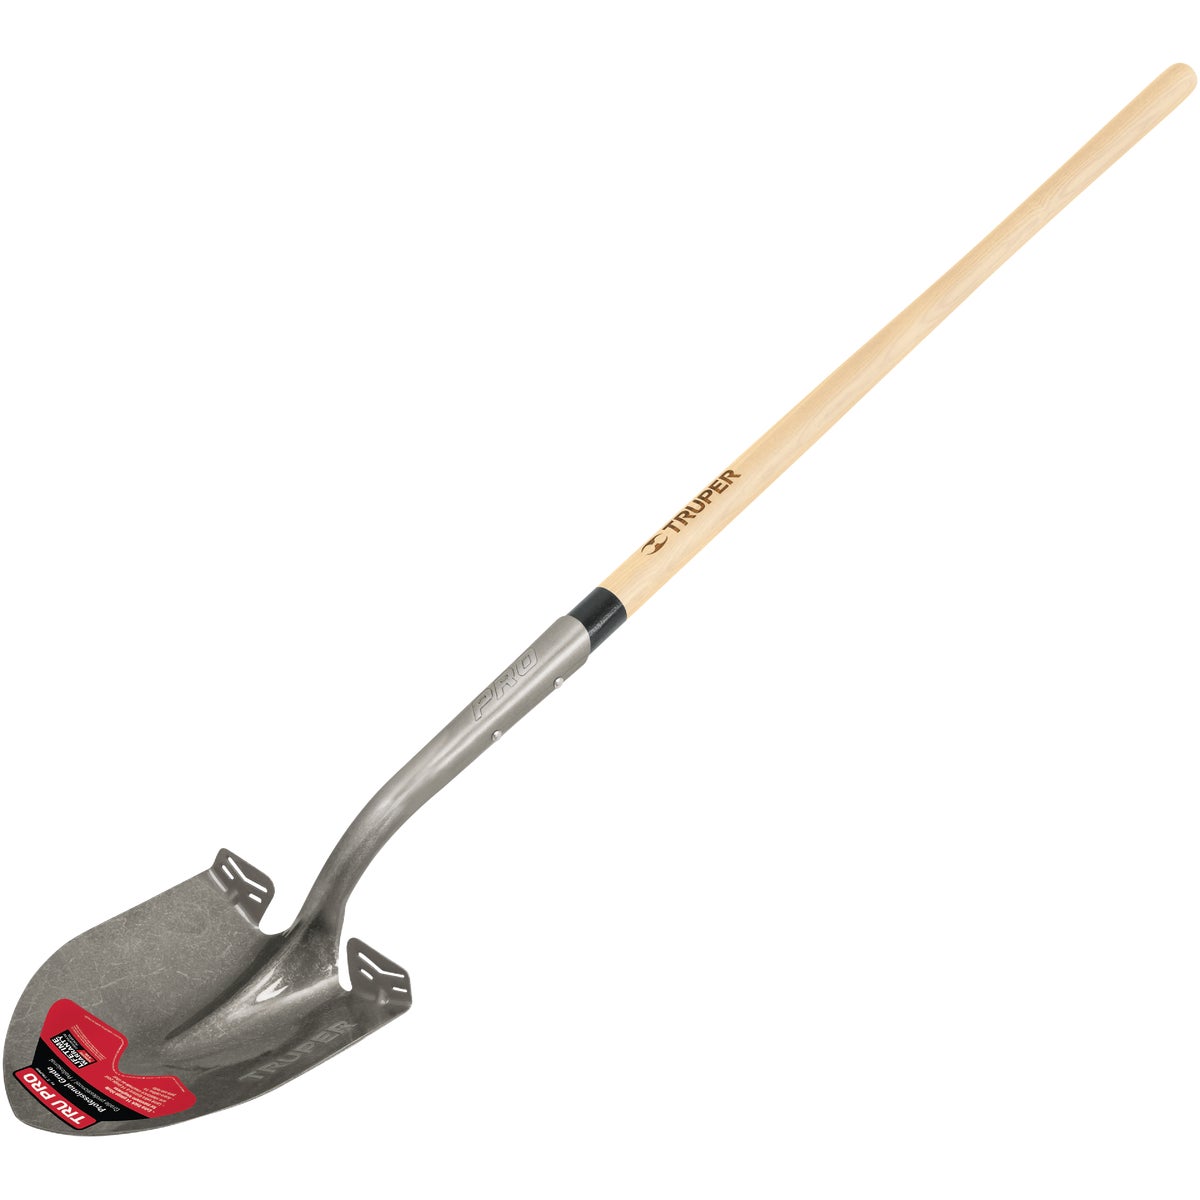 Item 739138, Truper Pro 14-gauge round point shovel with extended step and 48 In.